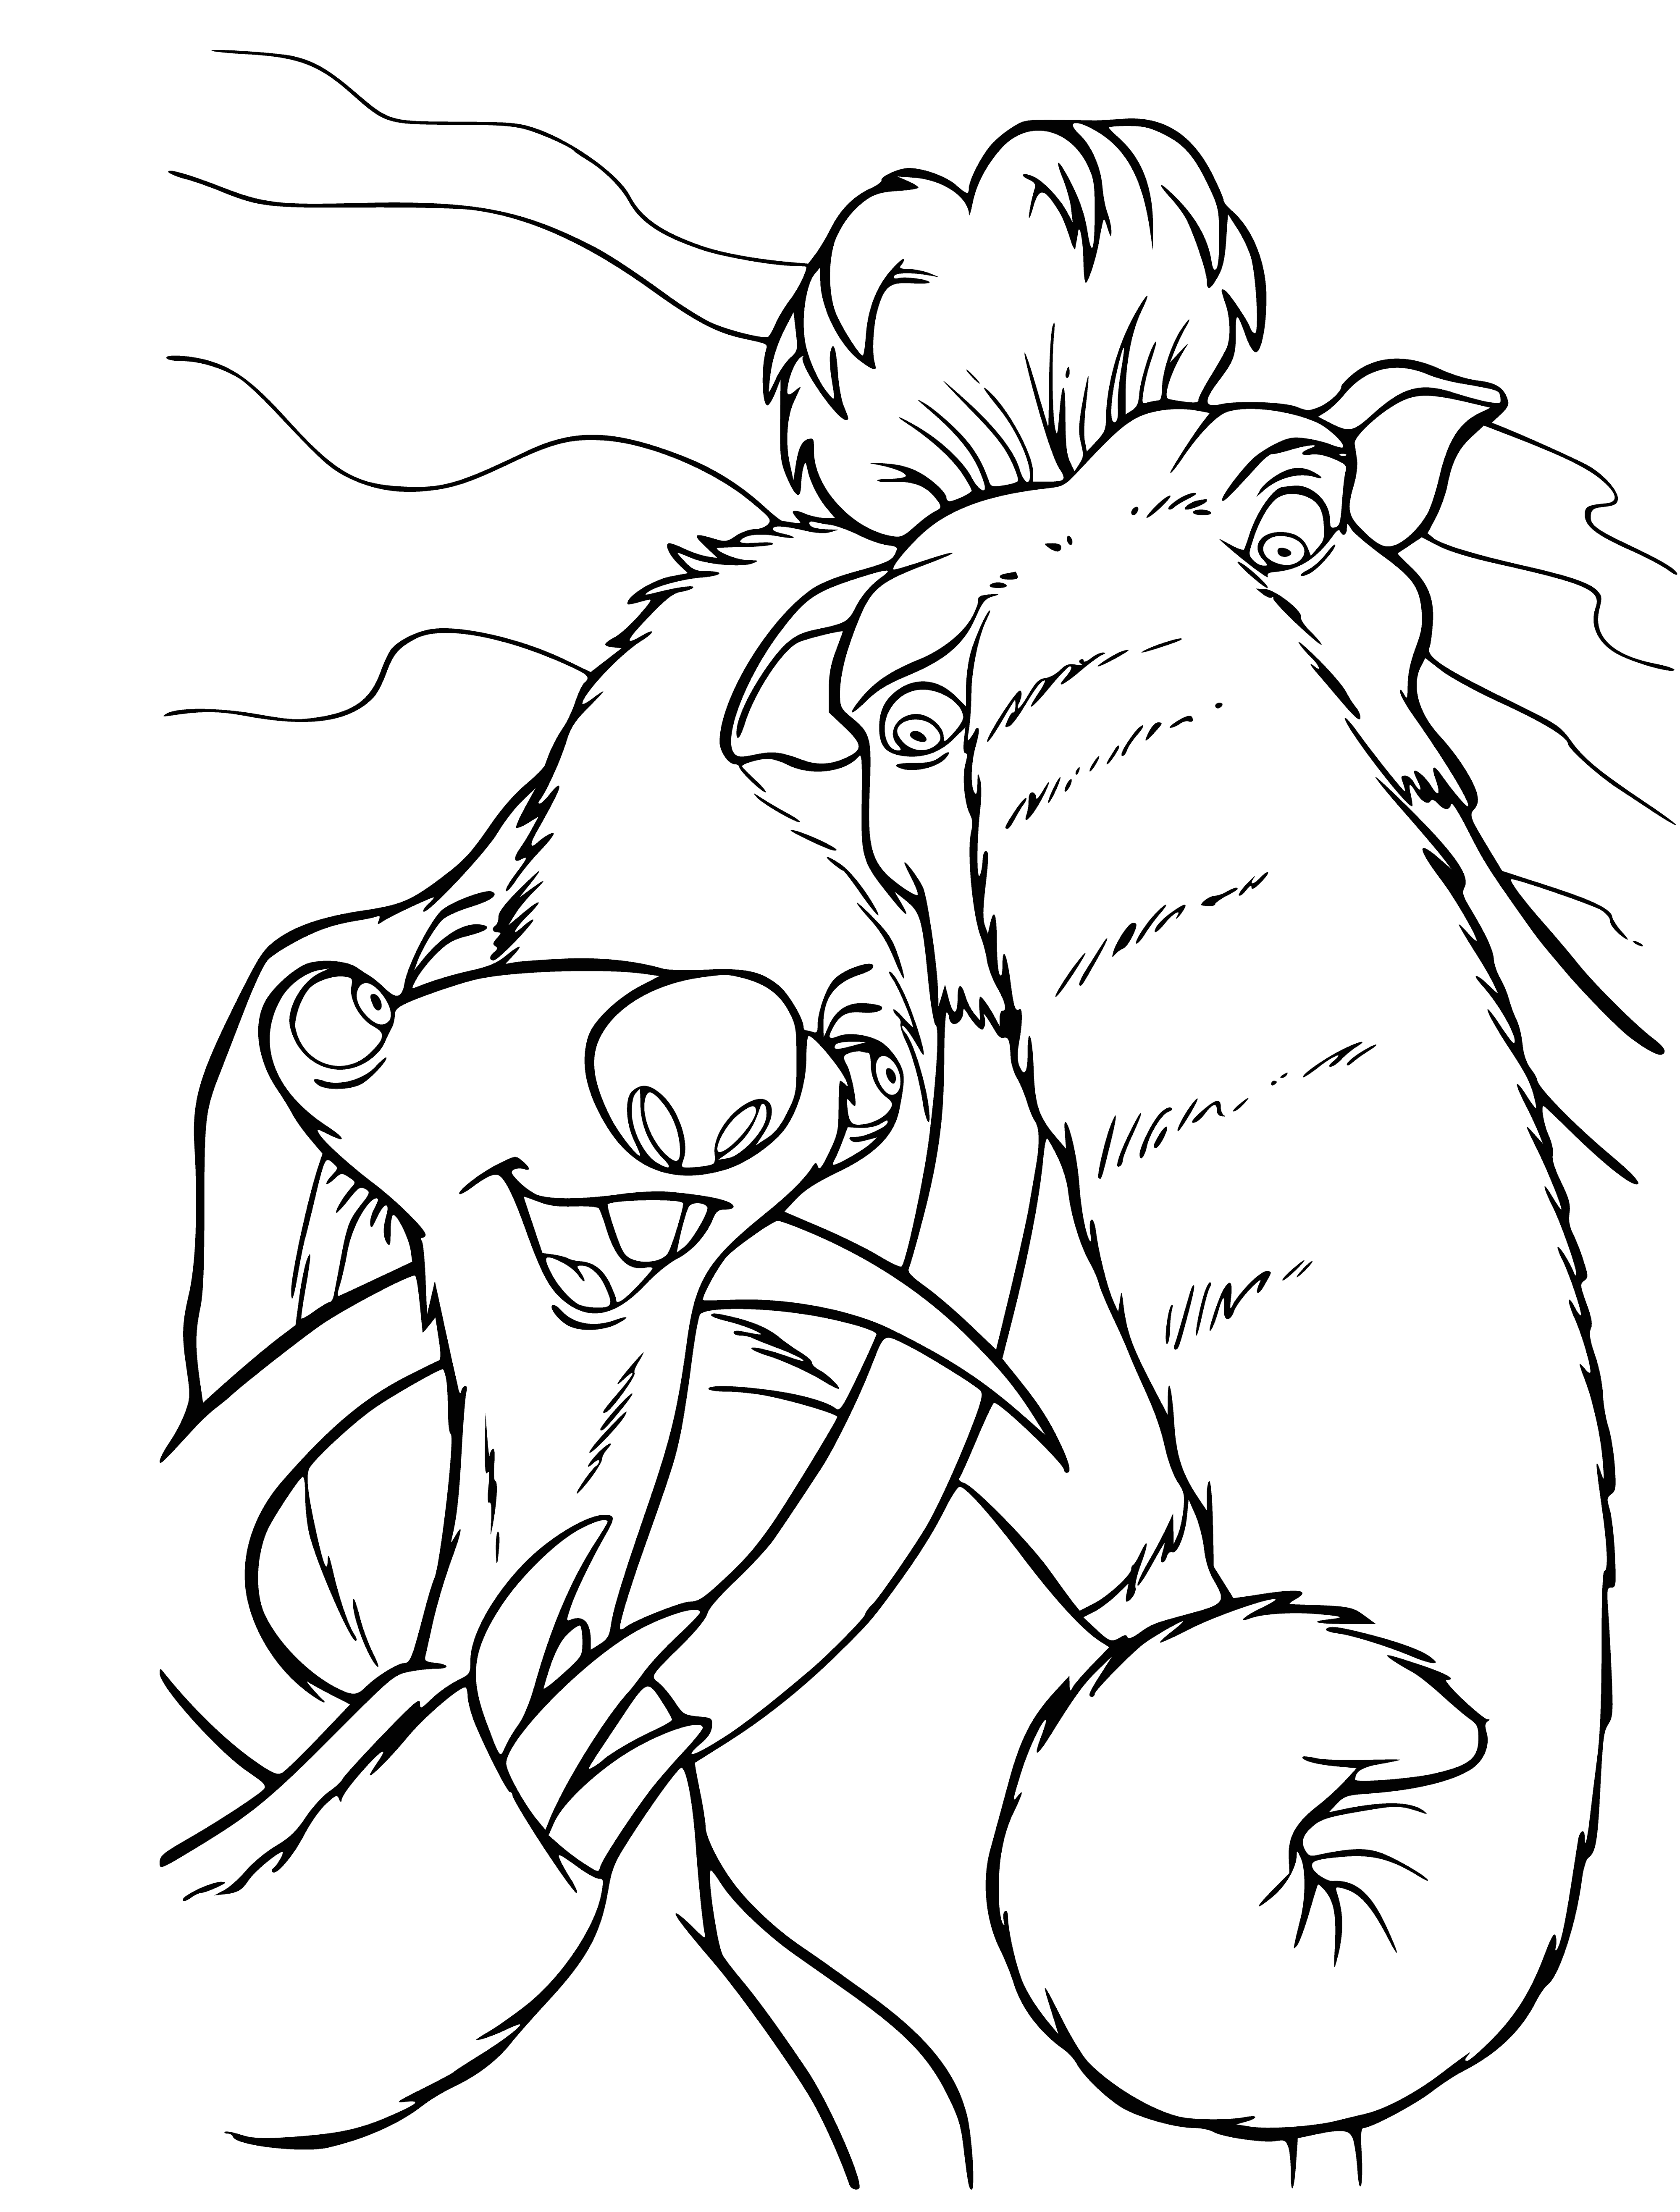 coloring page: Two creatures, a sloth and a mammoth, stand on a floating ice floe in a large, icy body of water beneath an overcast sky.